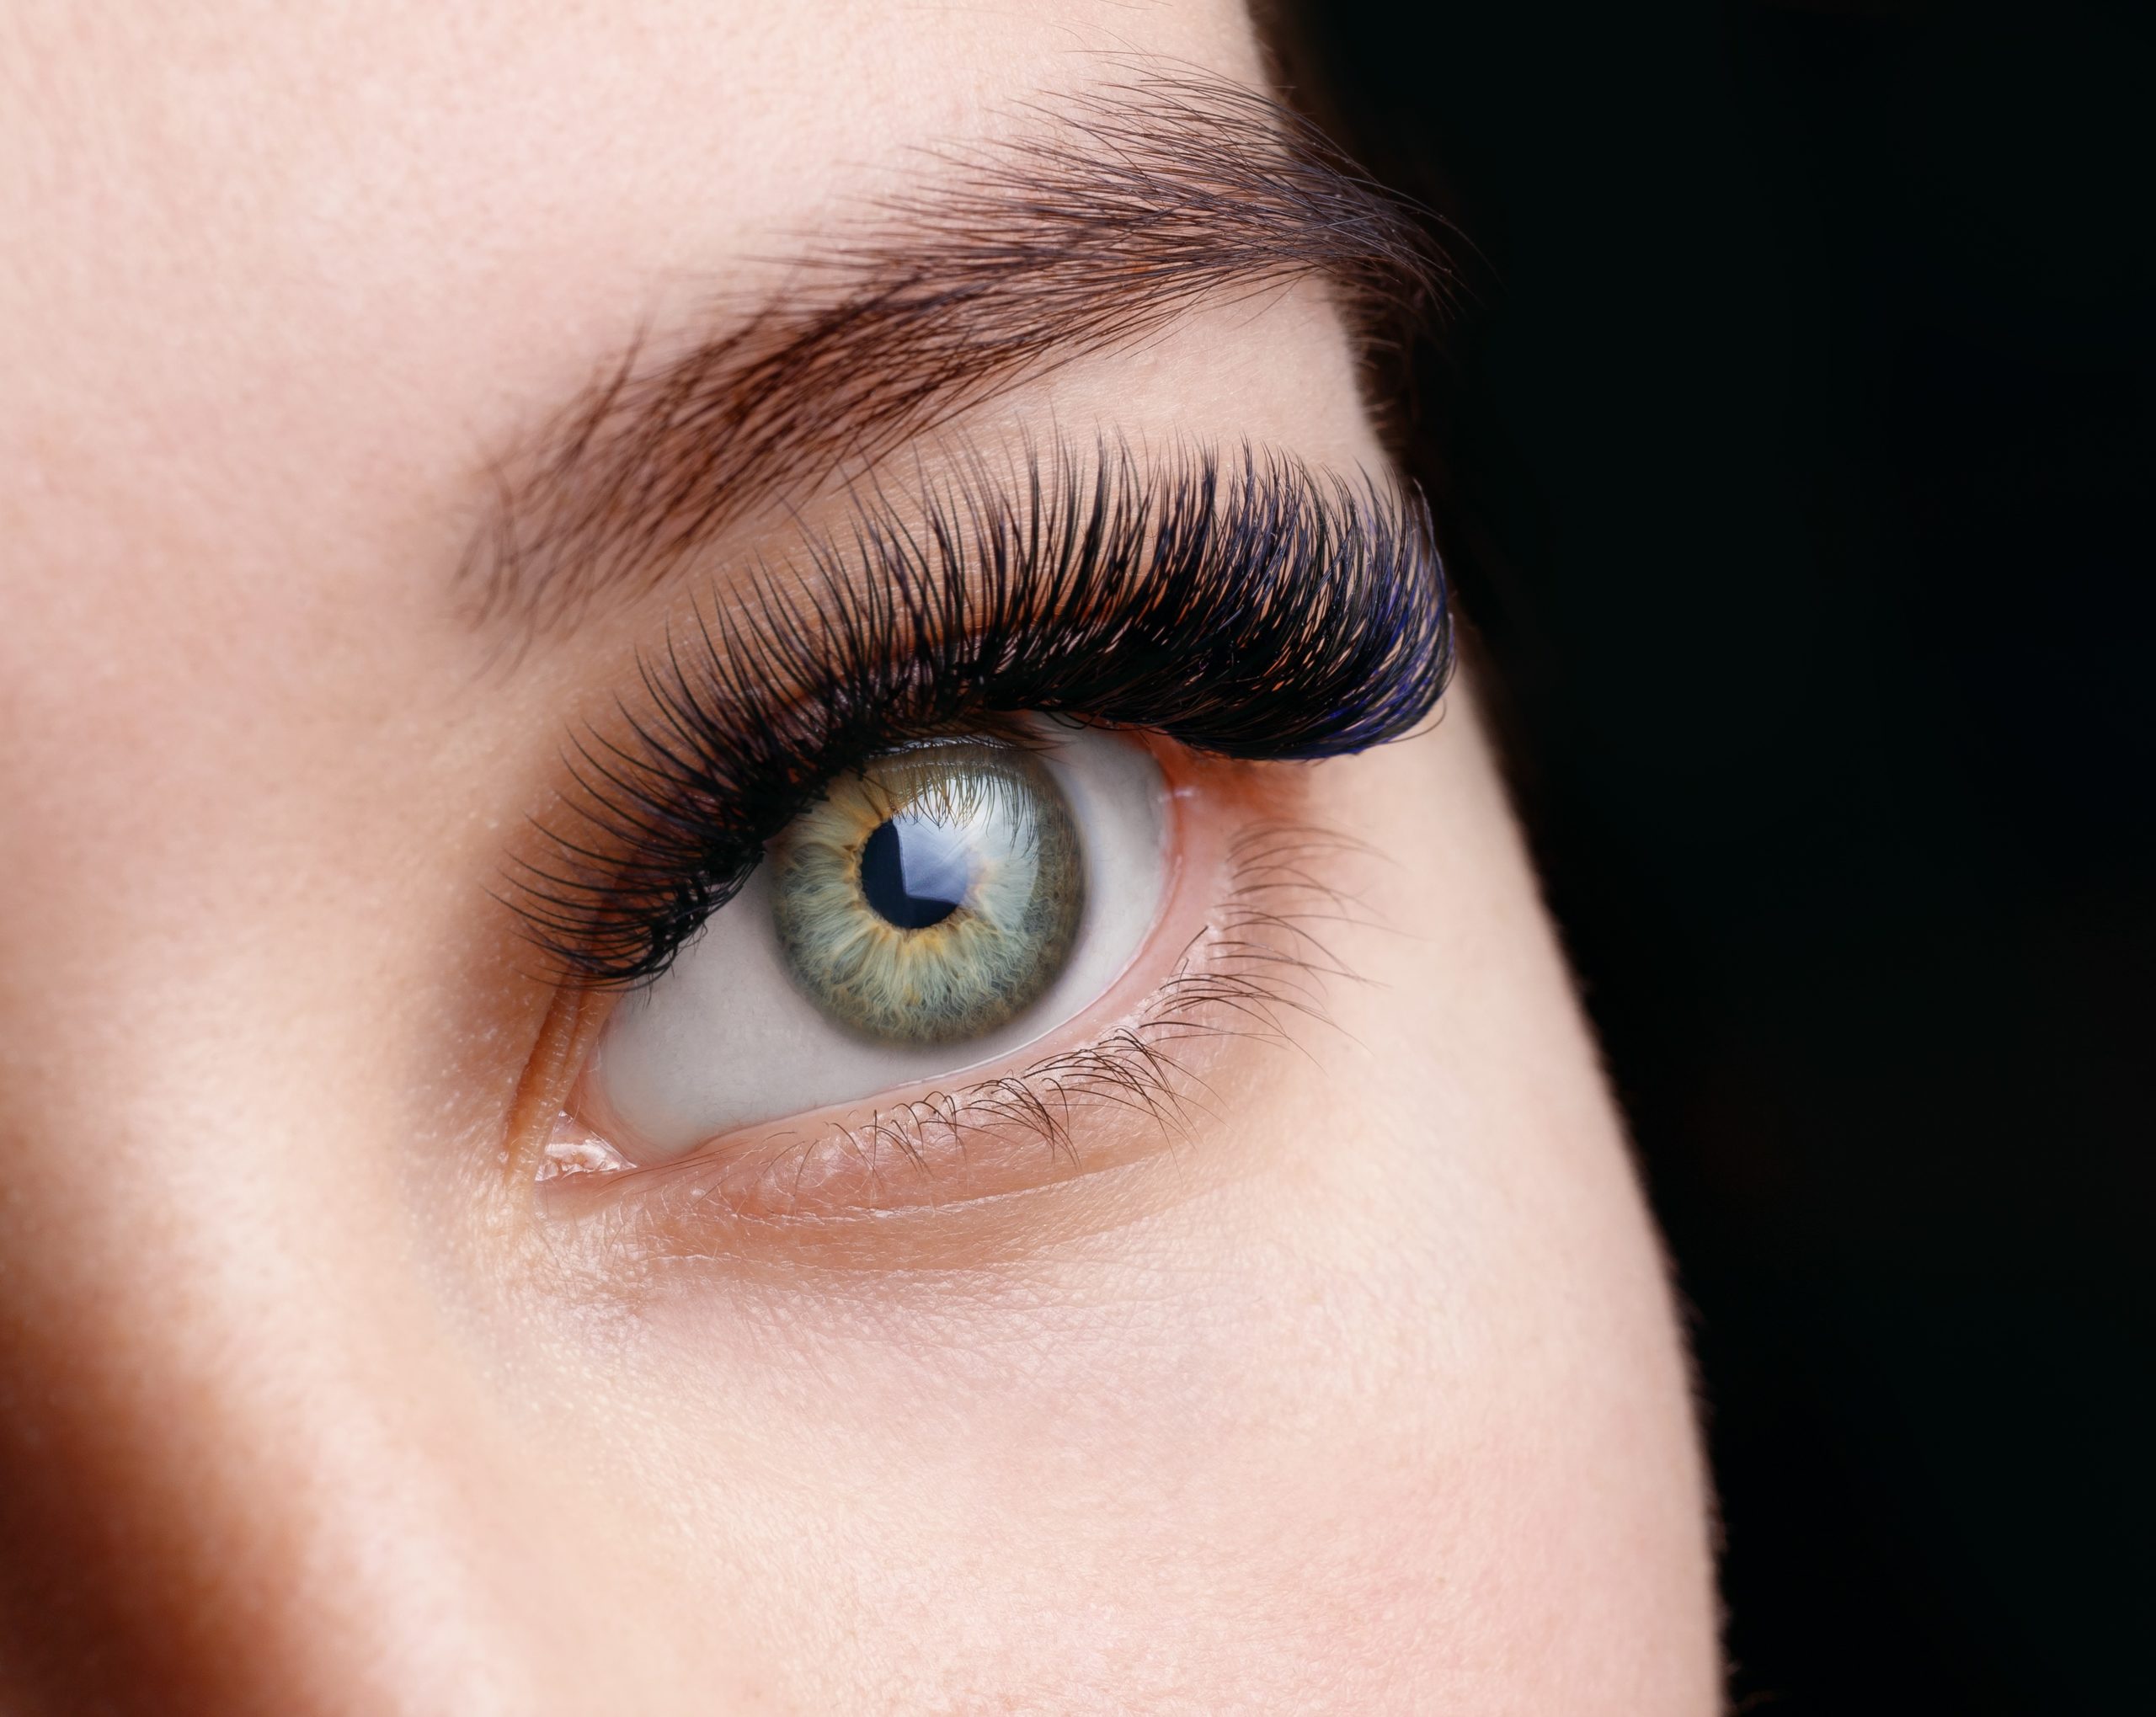 How Are Eyelash Extensions Harmful